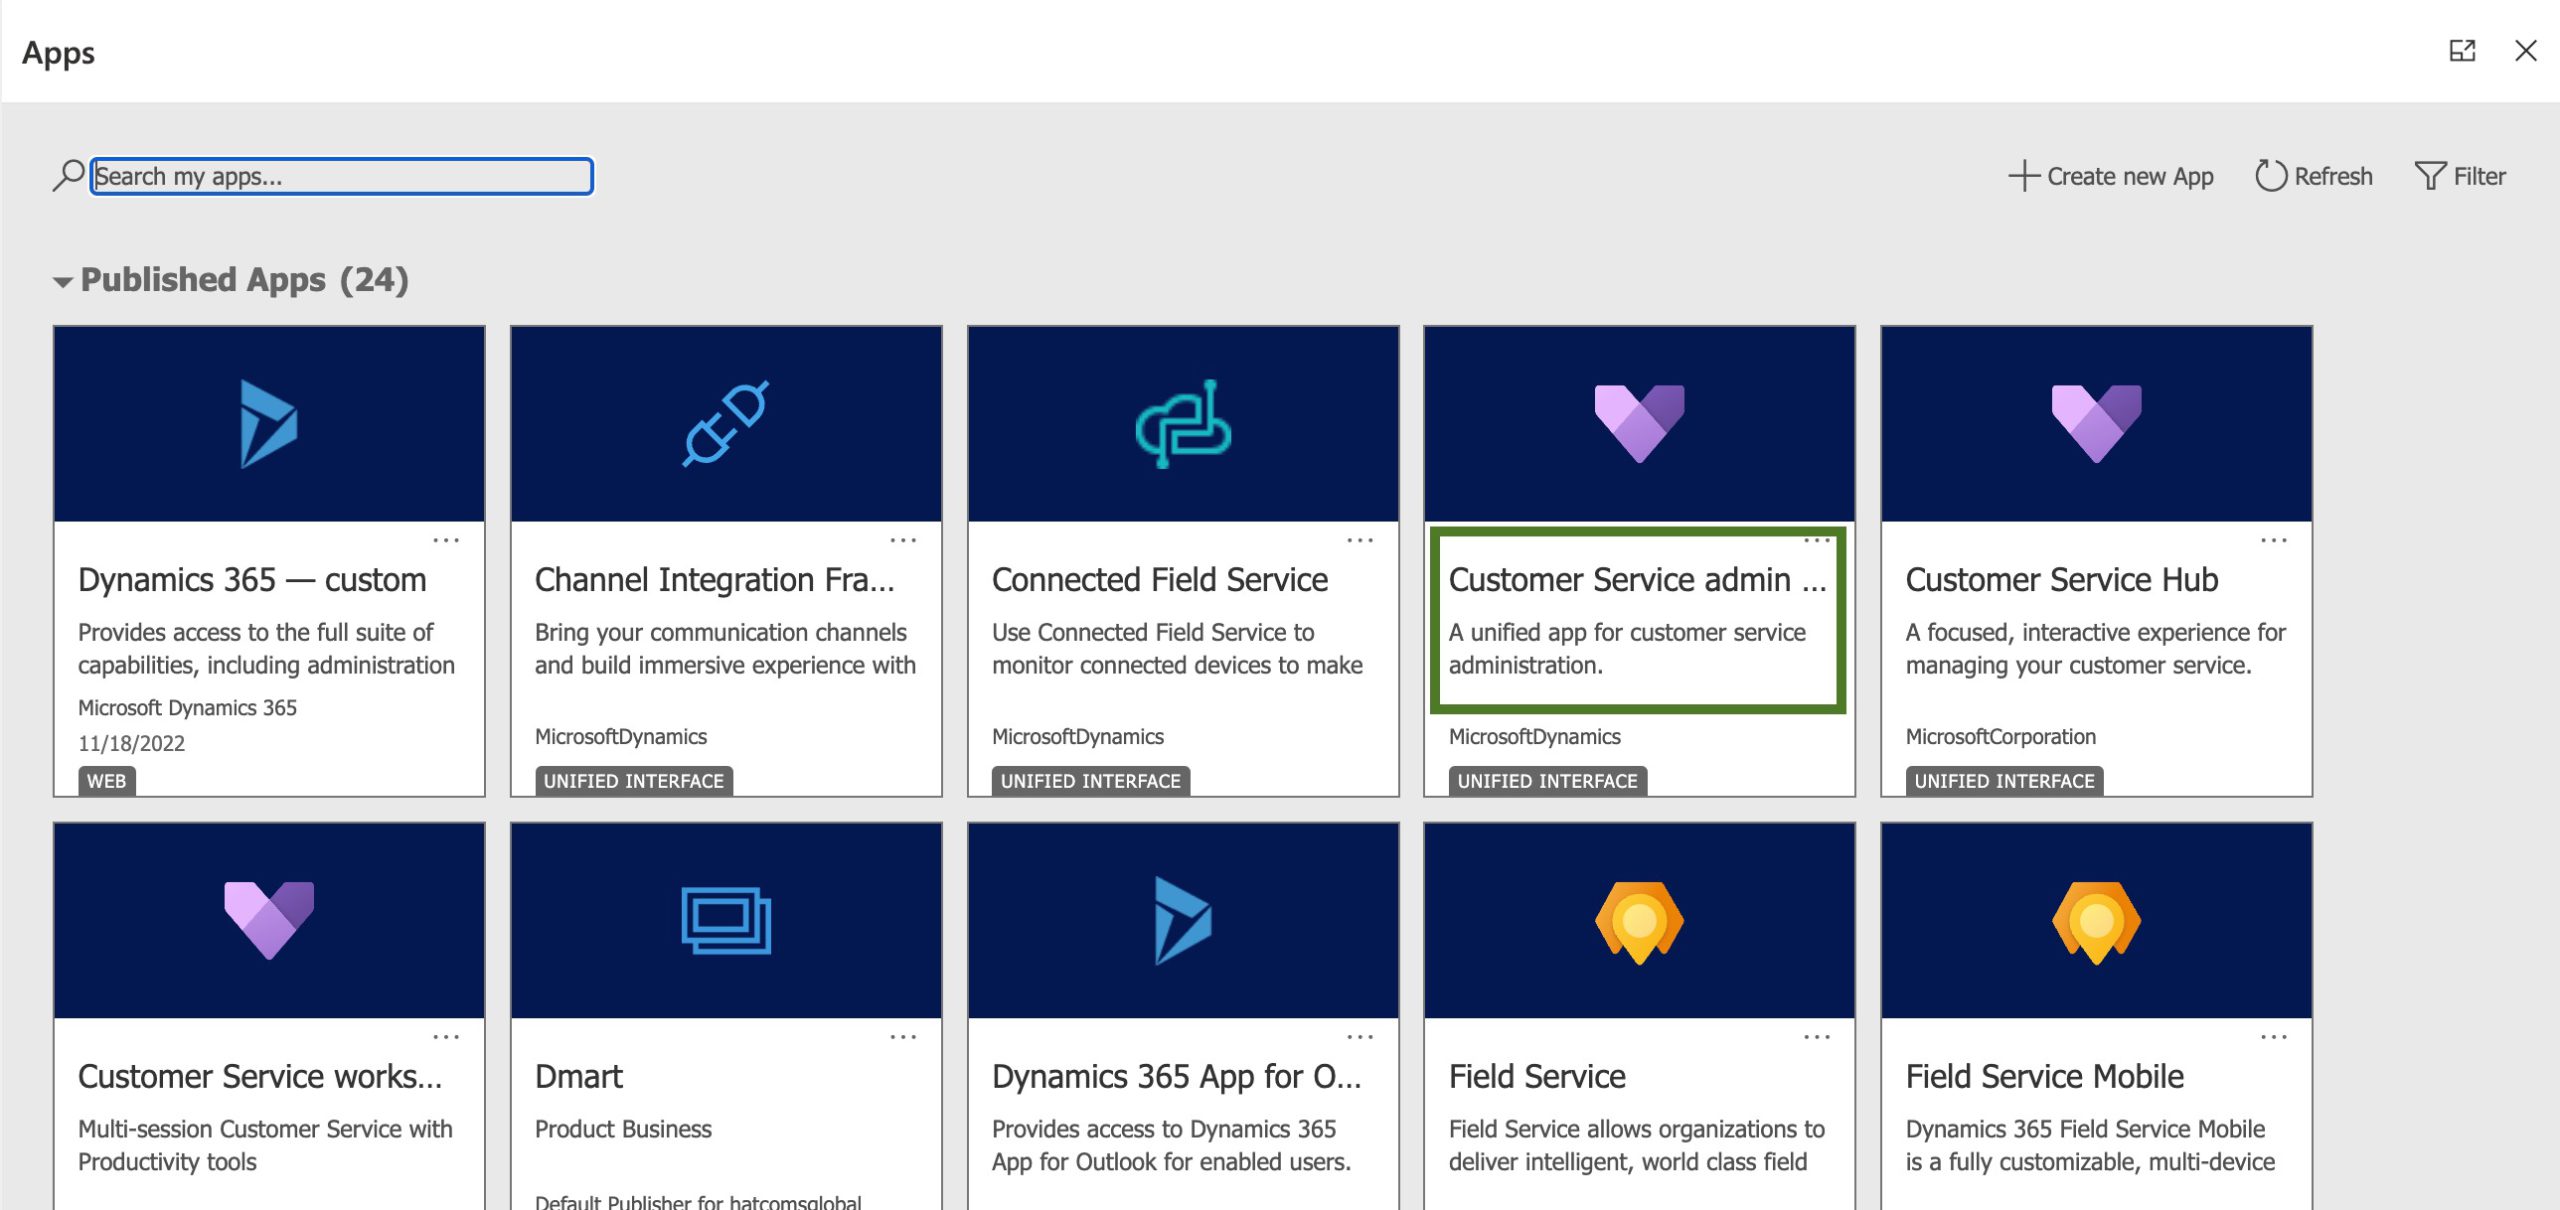 Configuring custom views for Inboxes through Agent Experience Profile within Dynamics 365 CRM